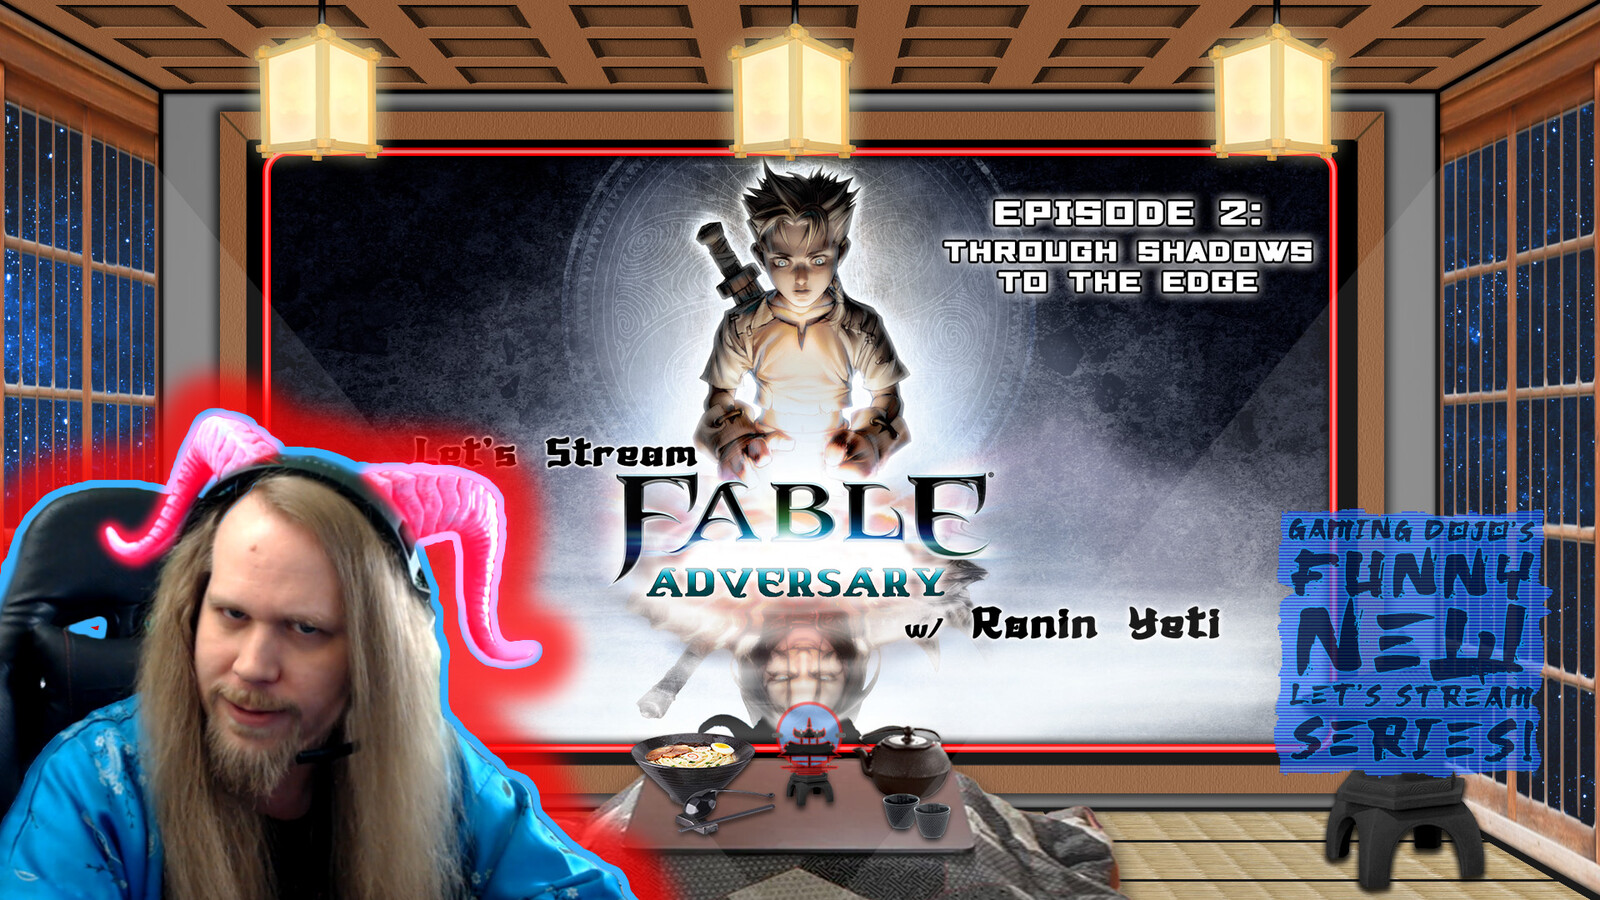 Let's Stream "Fable: Adversary" Episode 2 Image | Ronin Yeti Twitch Streaming